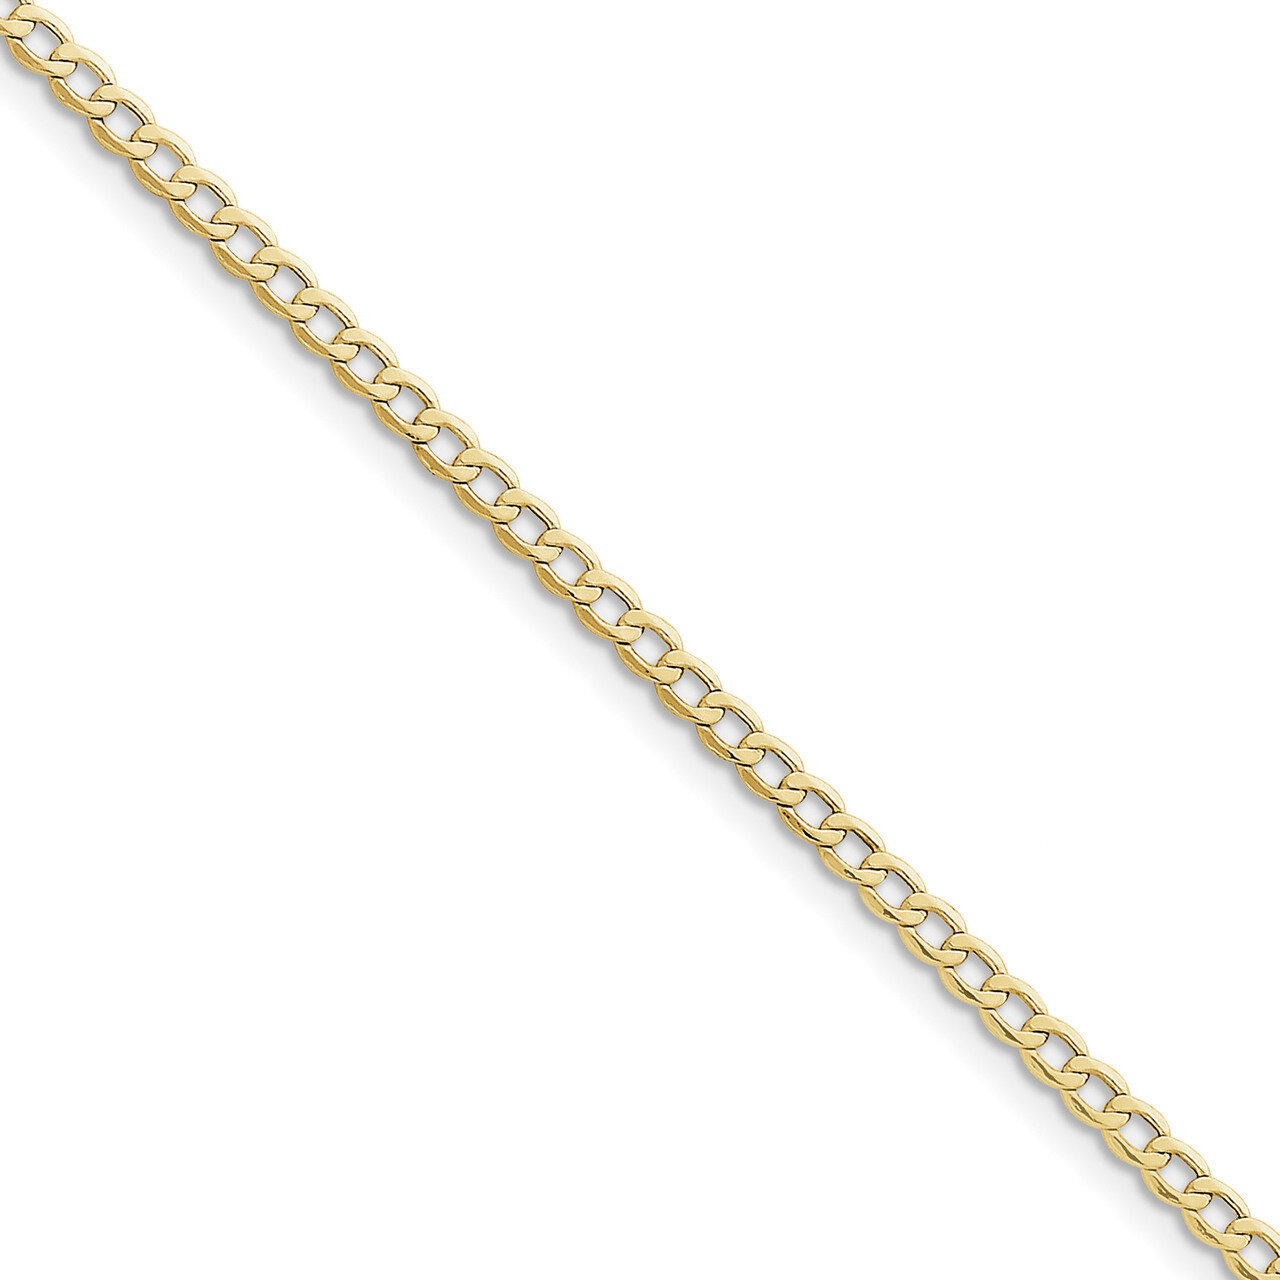 8 Inch 3.35mm Semi-Solid Curb Link Chain 10k Gold 10BC106-8